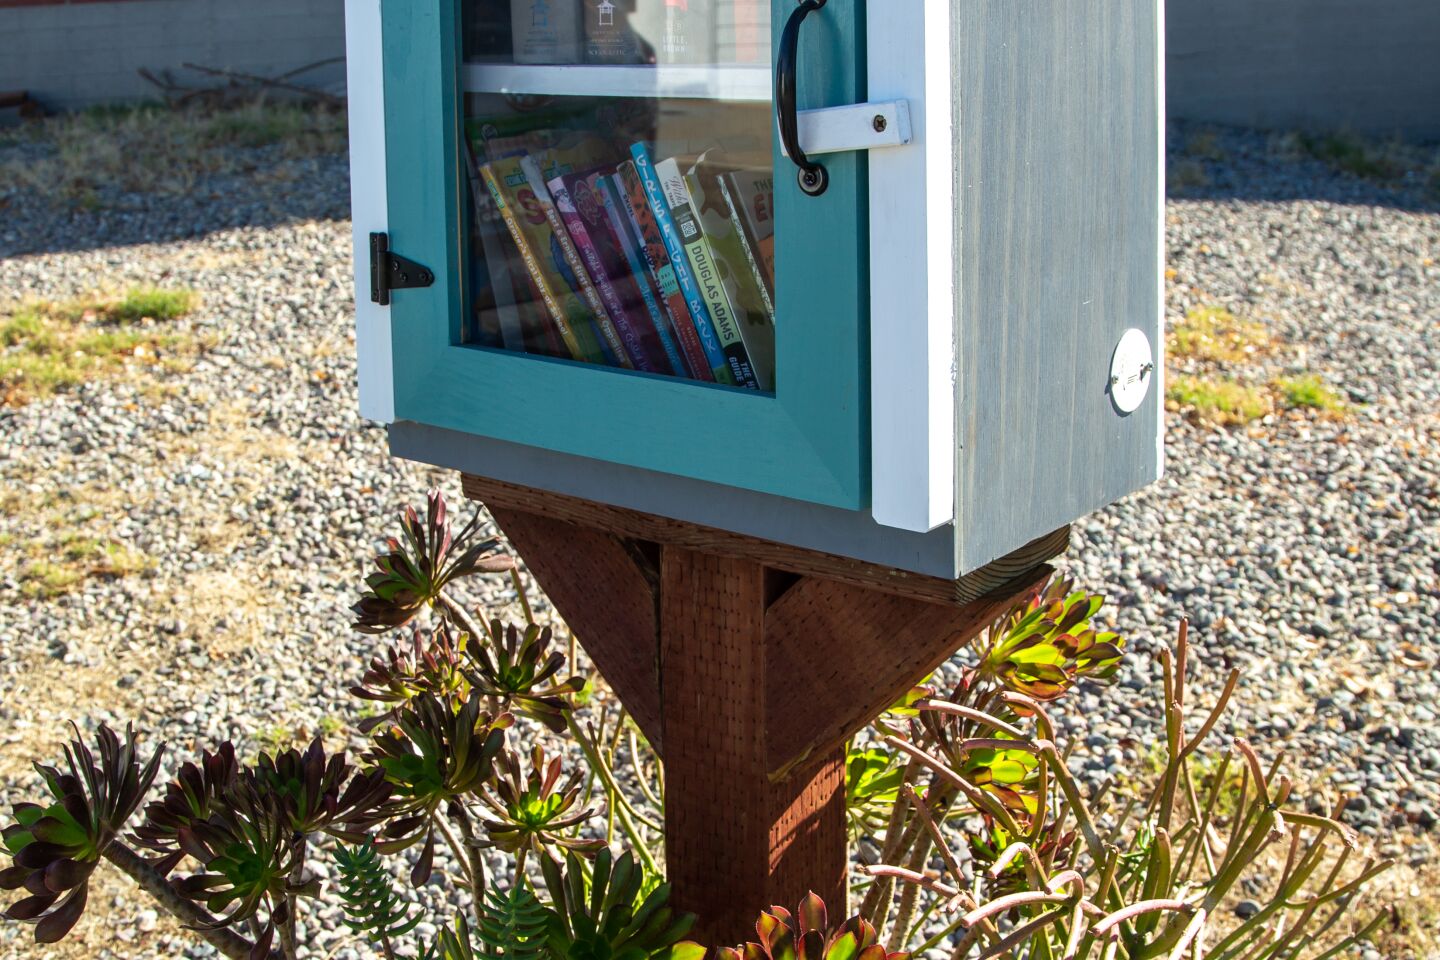 Neighbors in Valencia Park are reviving their community and working on installing Little Libraries, organizing community cleanups and scouting places for murals.